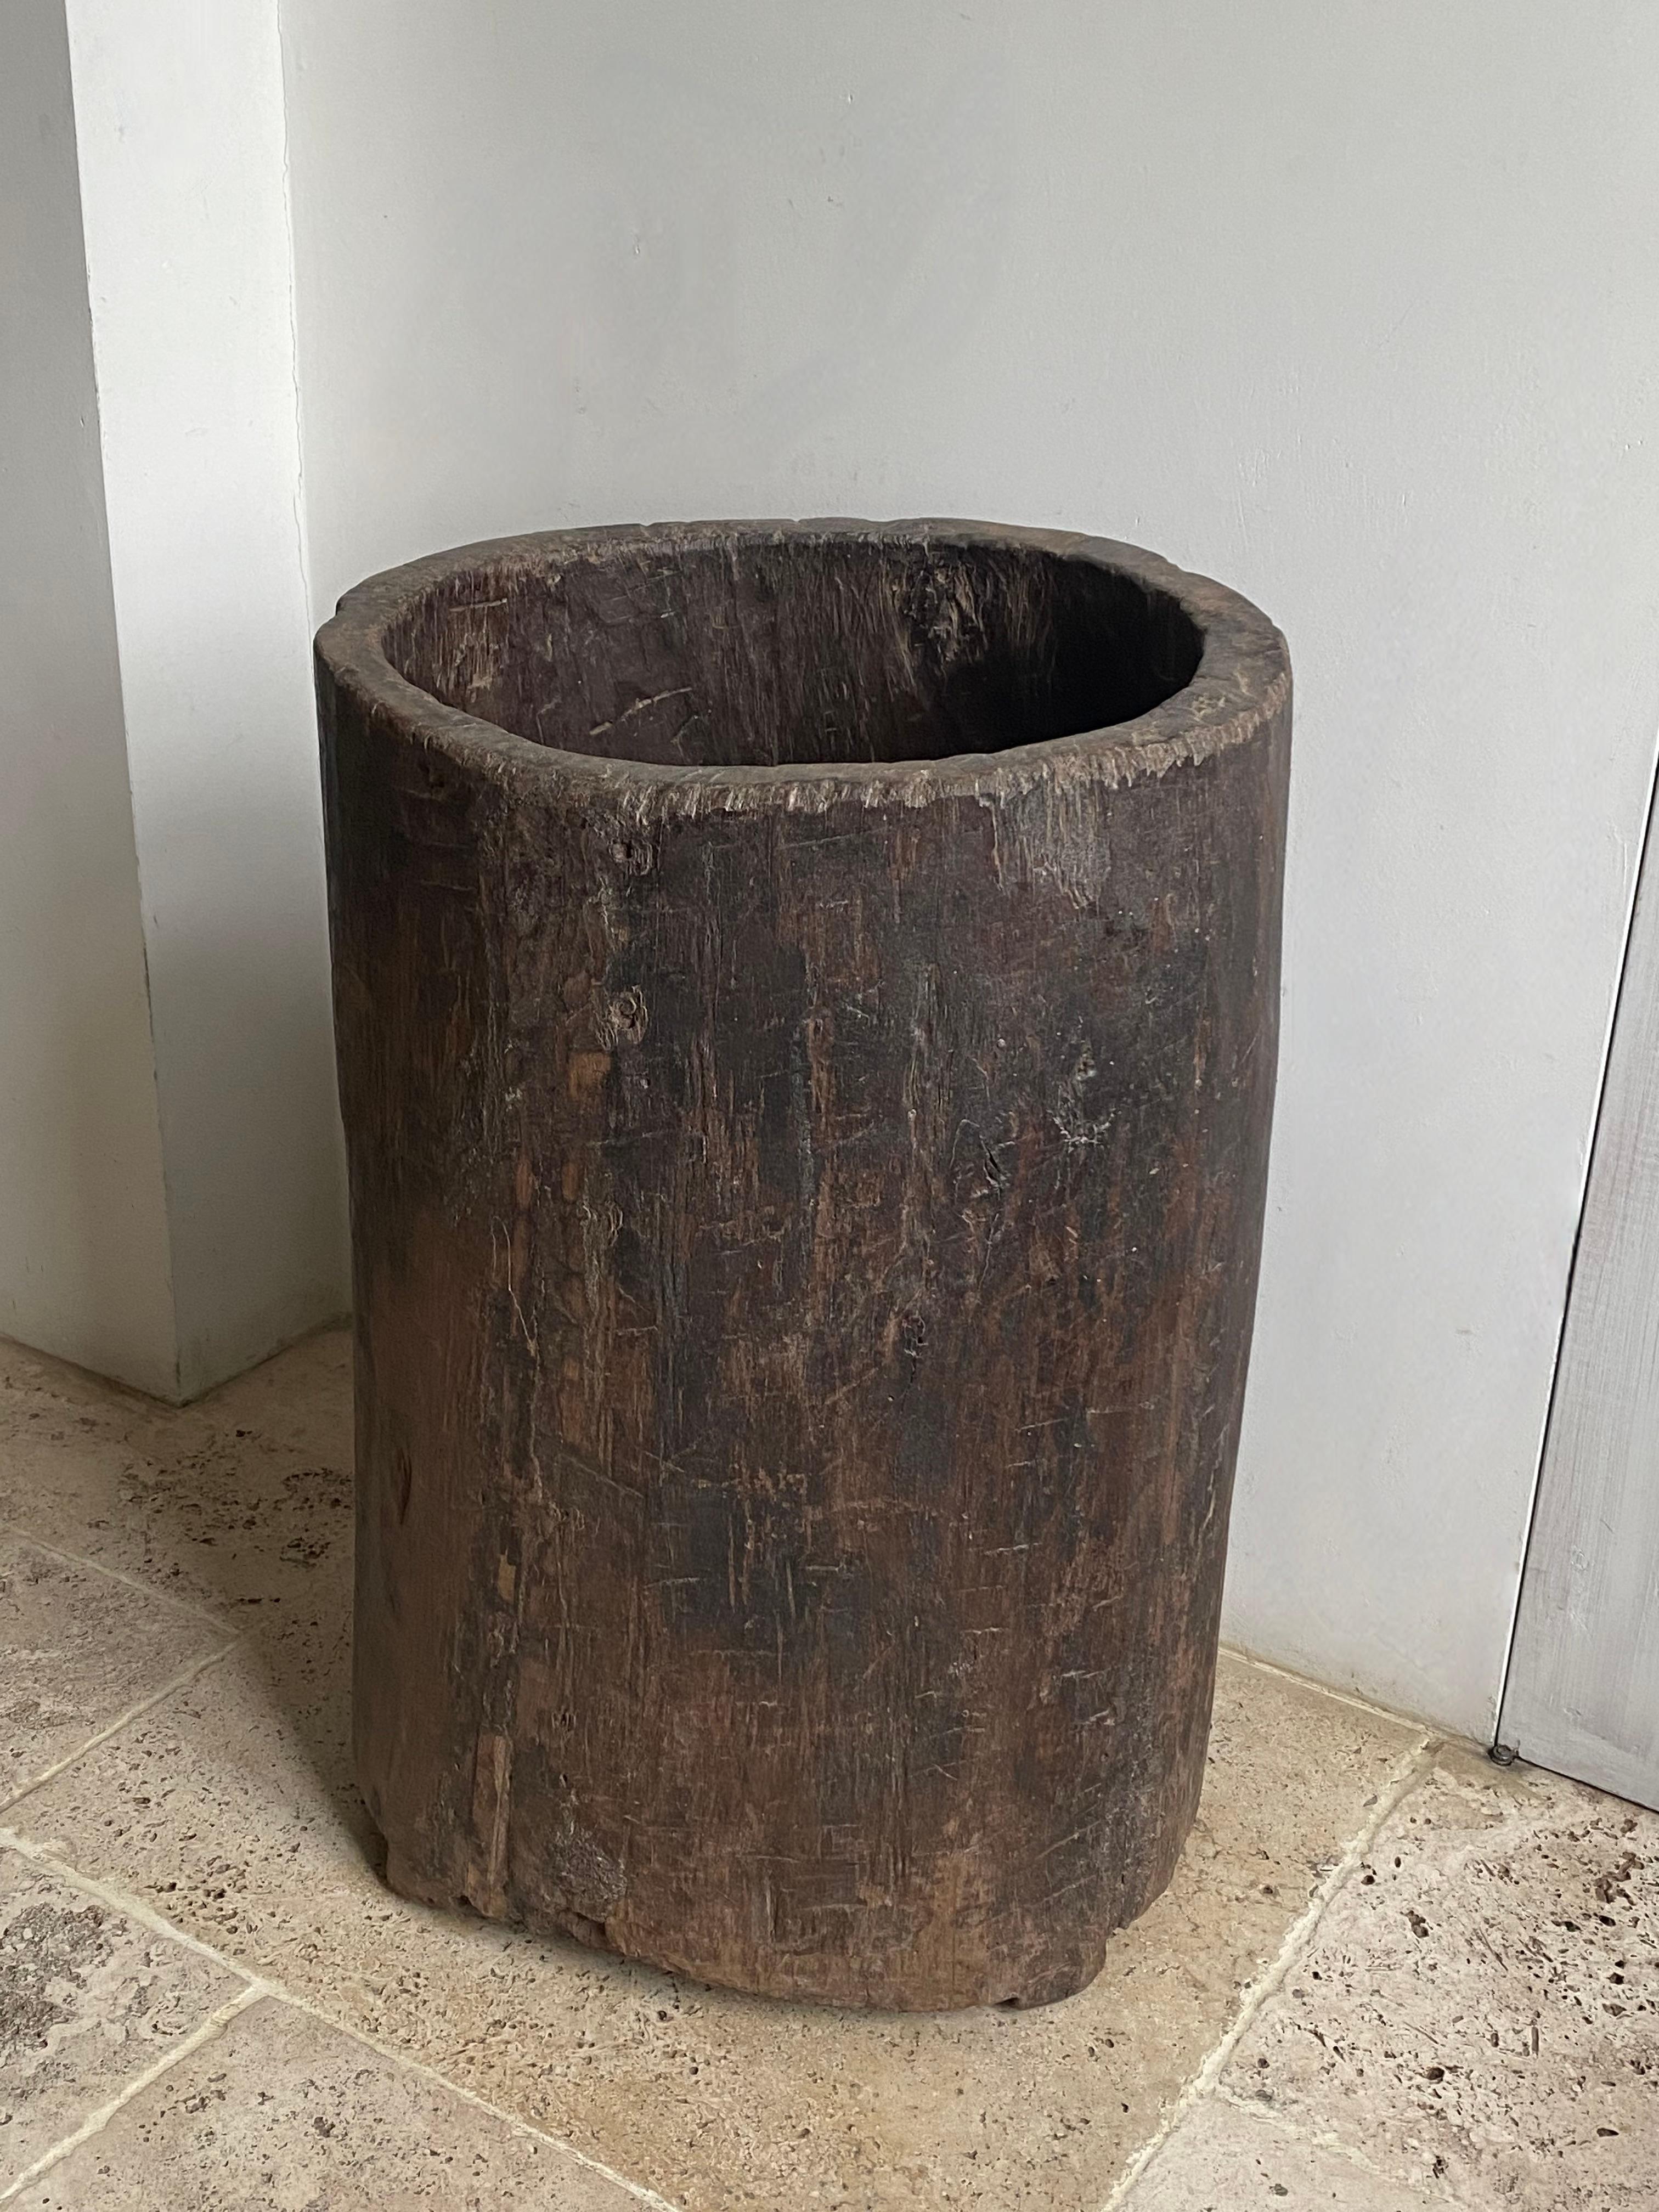 This hollowed-out tree trunk was once a storage vessel for raw materials.
Due to the constant treatment, the barrel is in beautiful condition and shows a lot of character through years of intensive use.


We ship worldwide with insurance, please ask